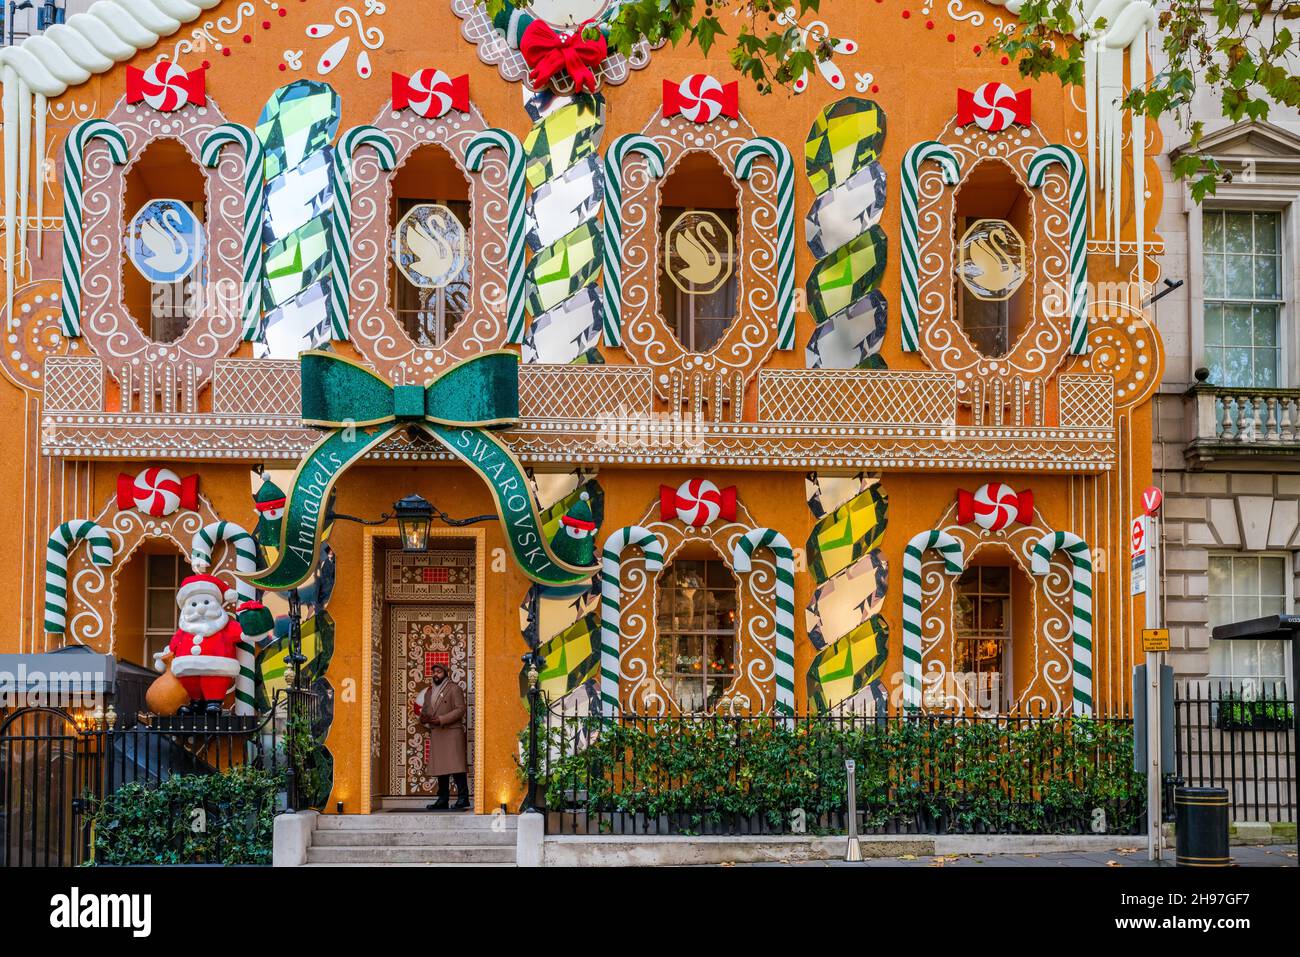 LONDON, UK - DECEMBER 04, 2021: Famous private club Annabel’s in London's Berkeley Square transforms front entrance into a giant gingerbread house Stock Photo